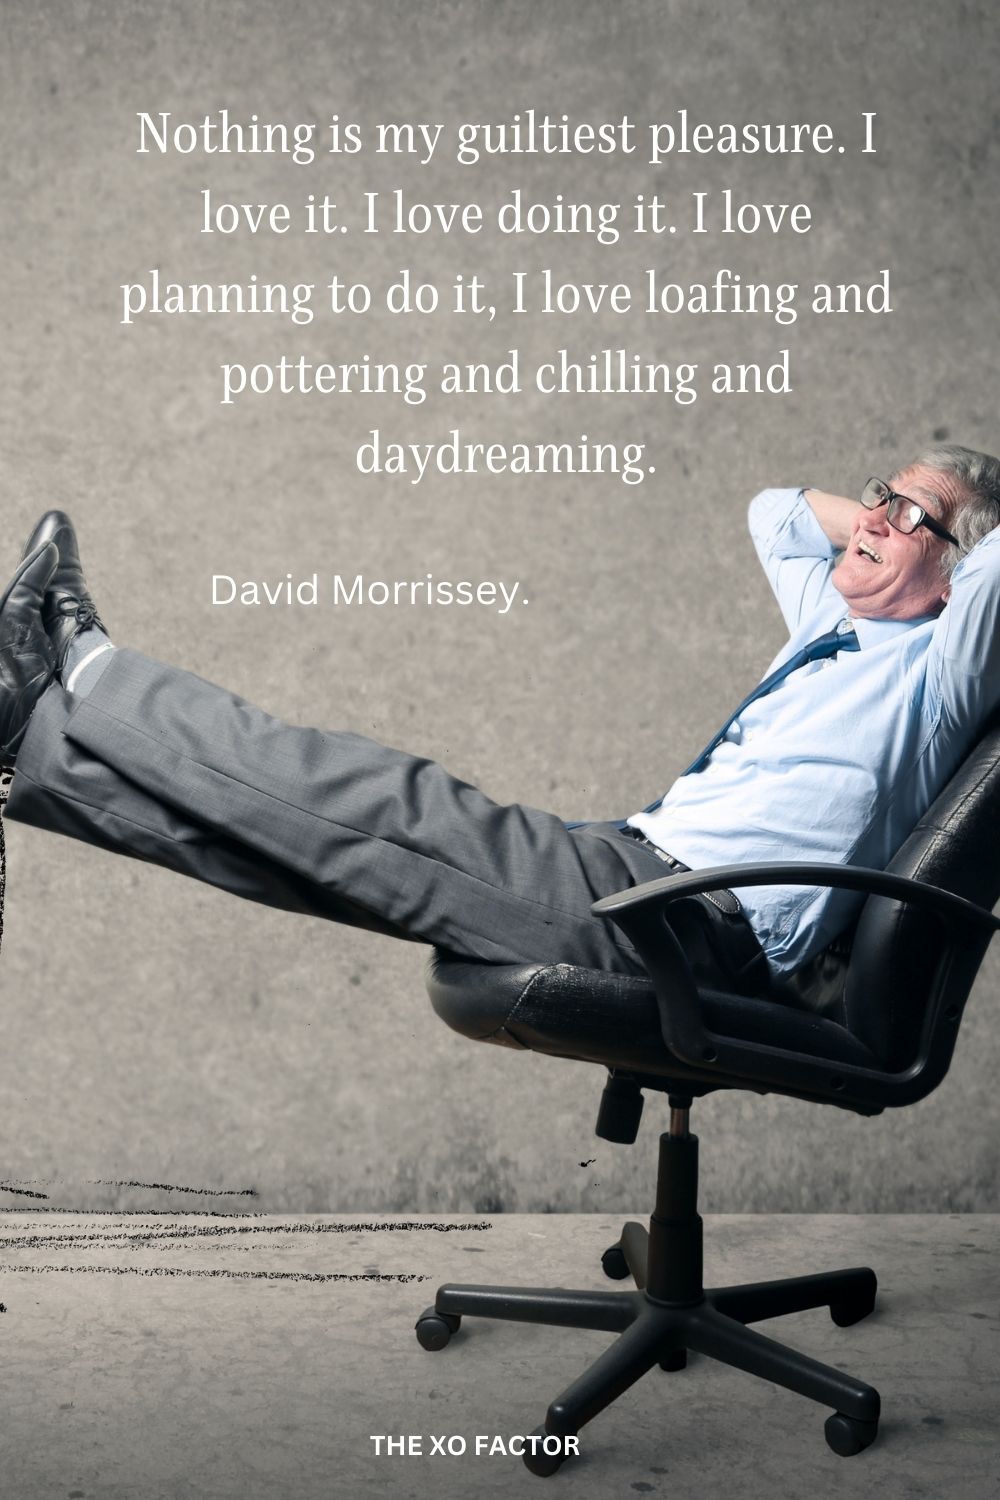 Nothing is my guiltiest pleasure. I love it. I love doing it. I love planning to do it, I love loafing and pottering and chilling and daydreaming.
David Morrissey.